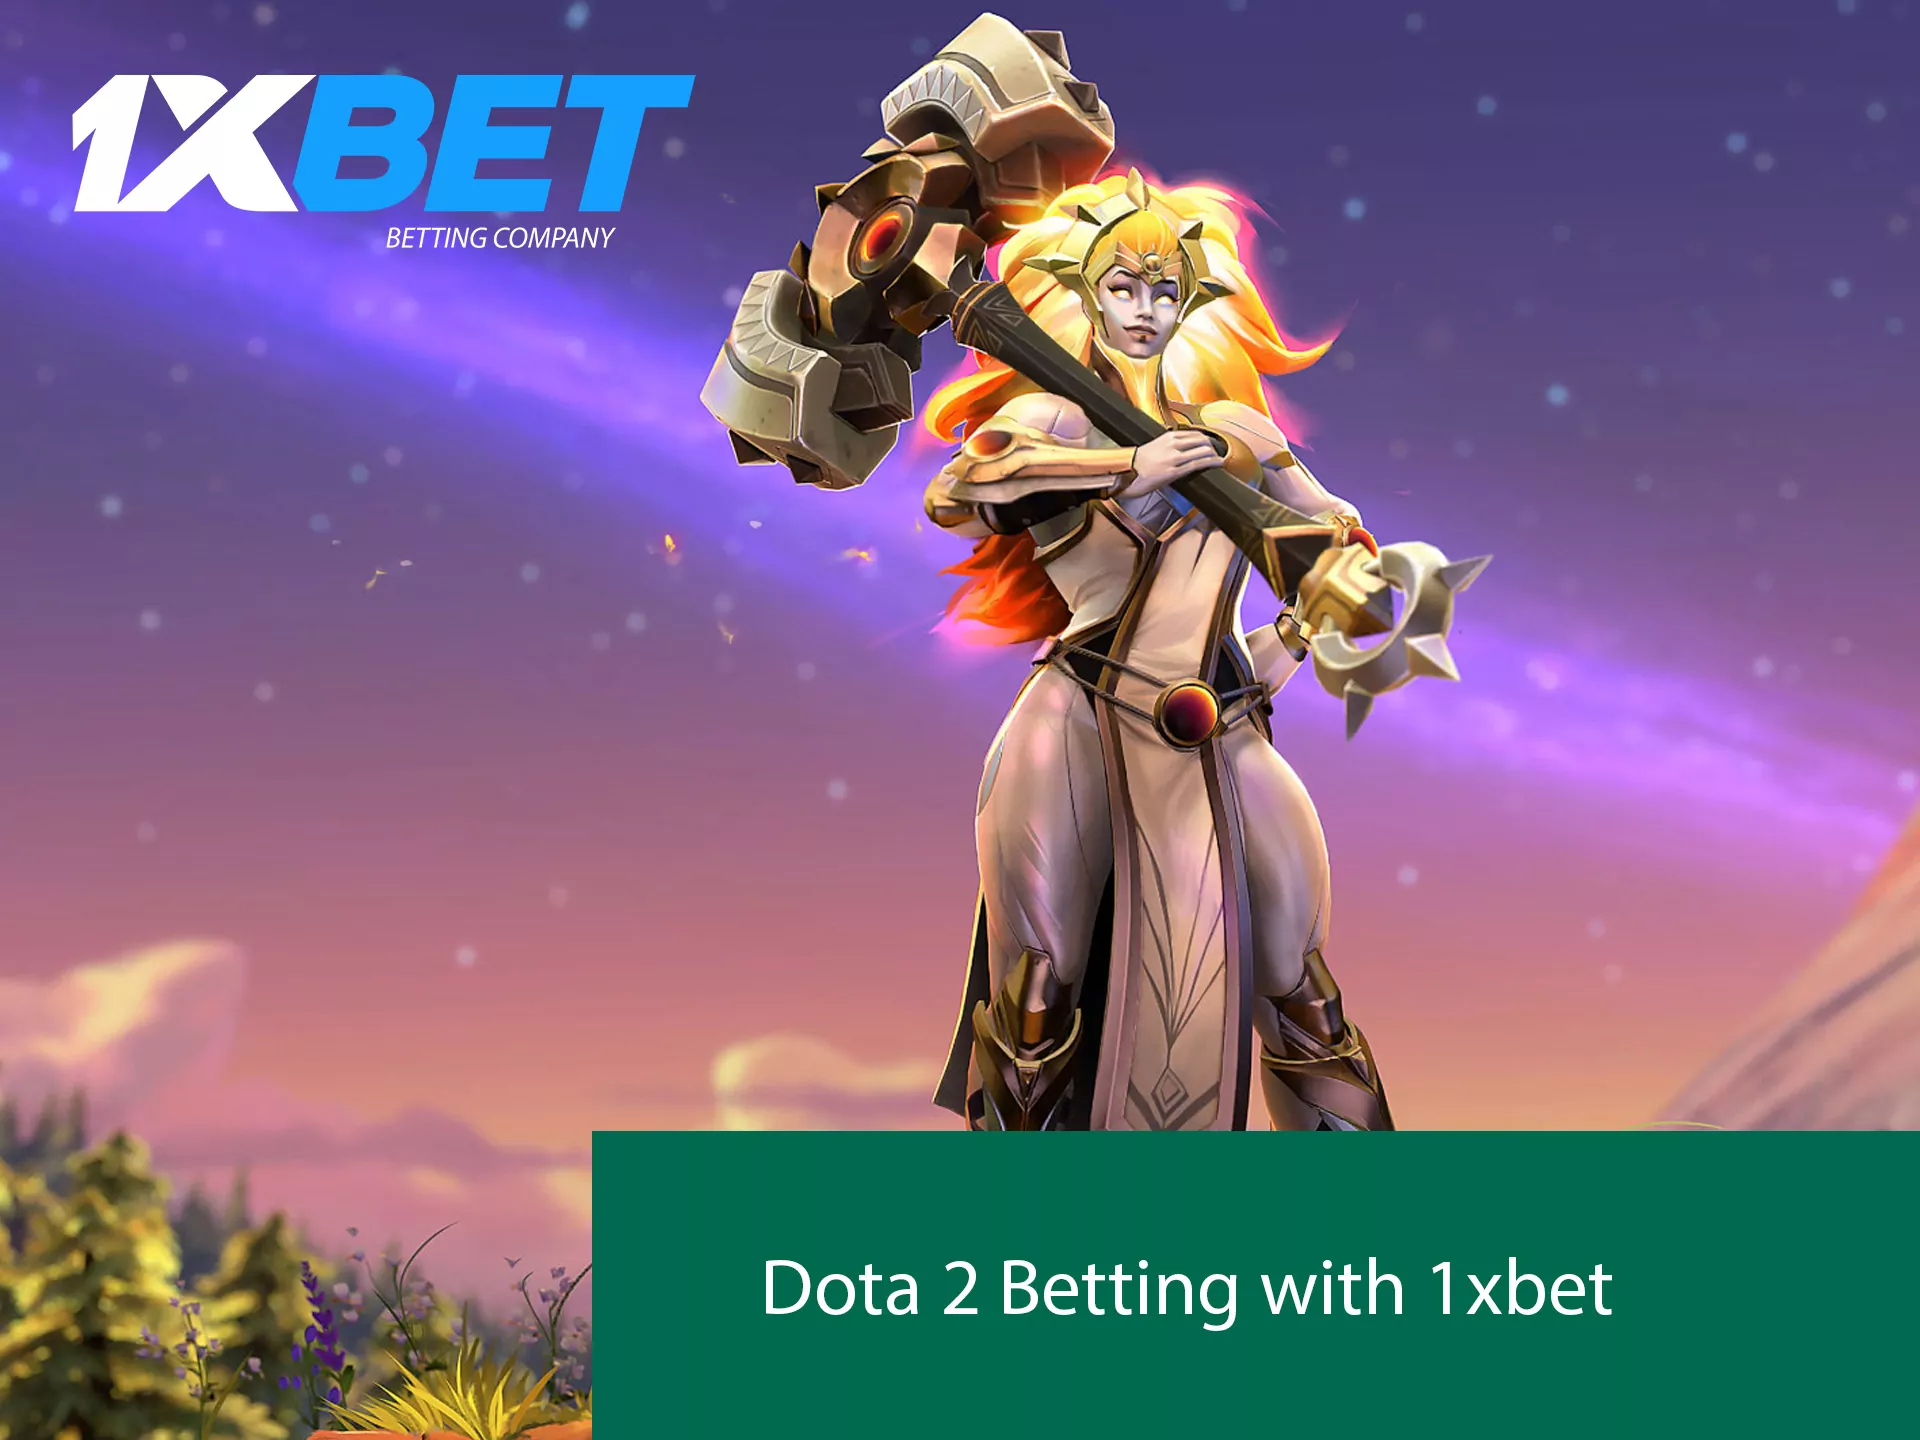 In 1bet you will find different bets.